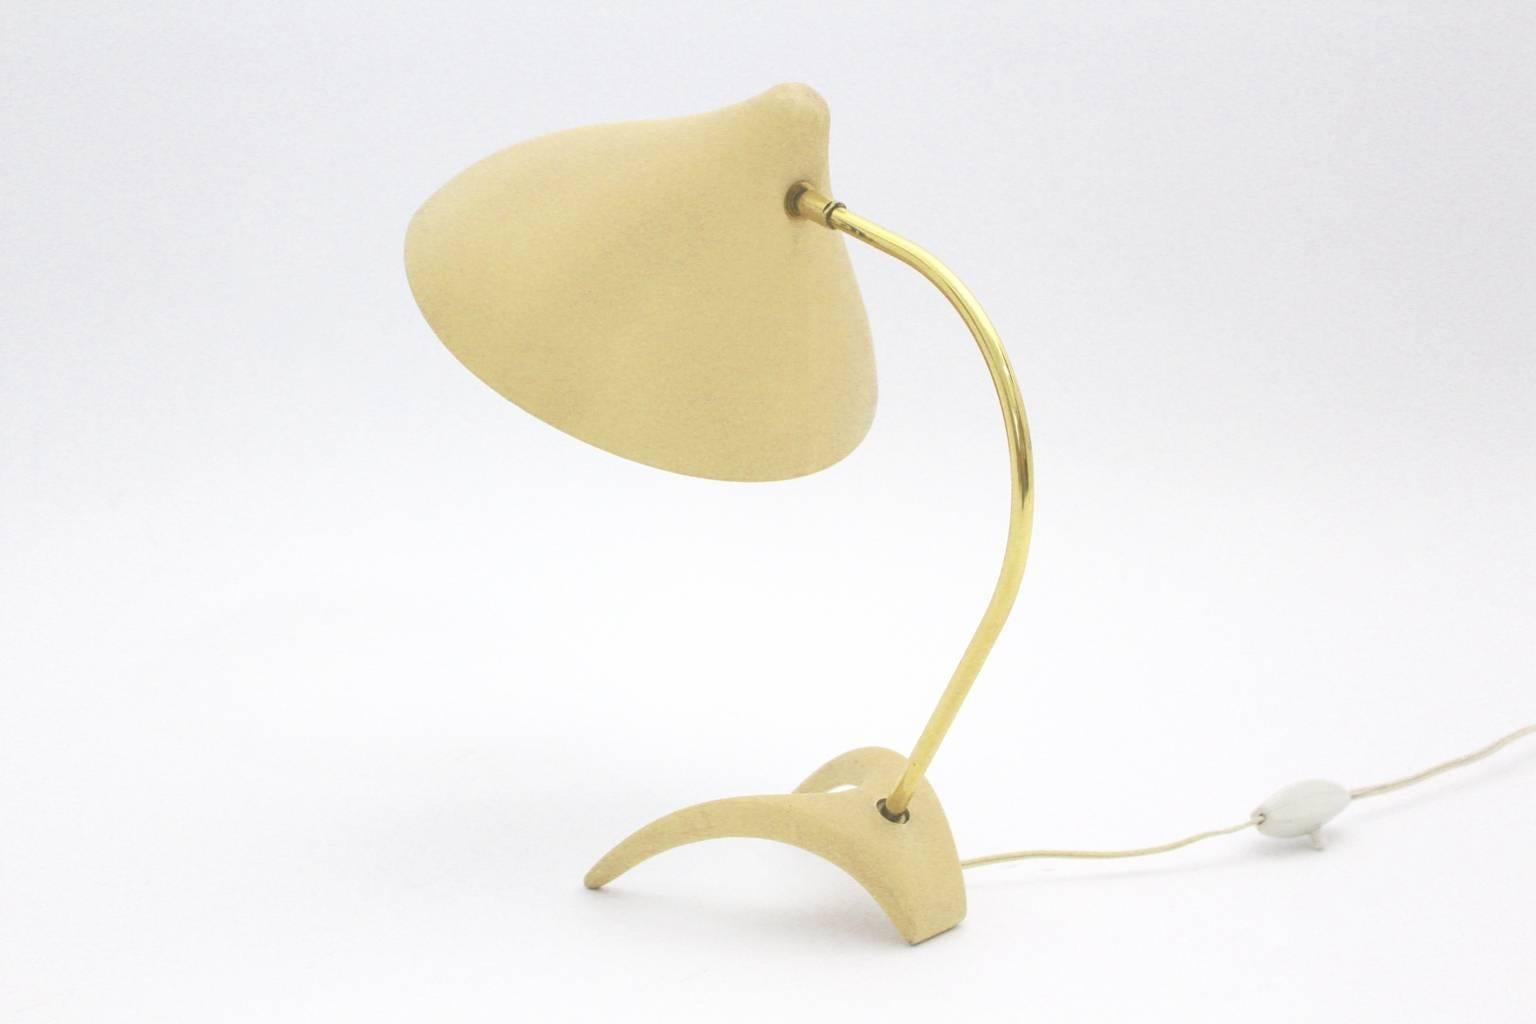 A lovely yellow mid century modern vintage table lamp, which shows a cast iron foot with a curved brass stem.
Designed by Louis Kalff in the 1950s for Philips Netherland.

The conical shade was made ofyellow lacquered aluminum. The table lamp has an